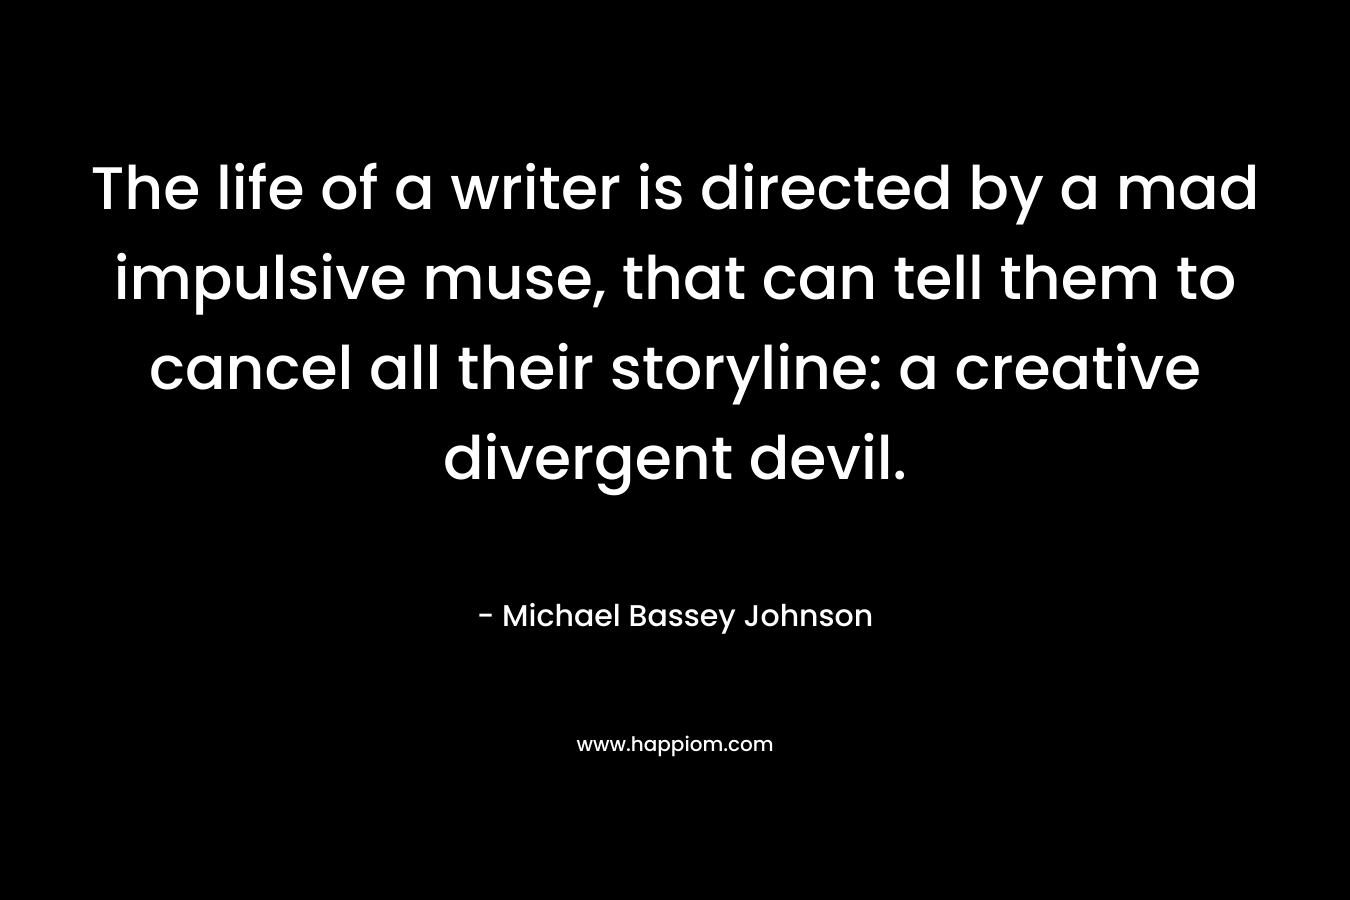 The life of a writer is directed by a mad impulsive muse, that can tell them to cancel all their storyline: a creative divergent devil. – Michael Bassey Johnson